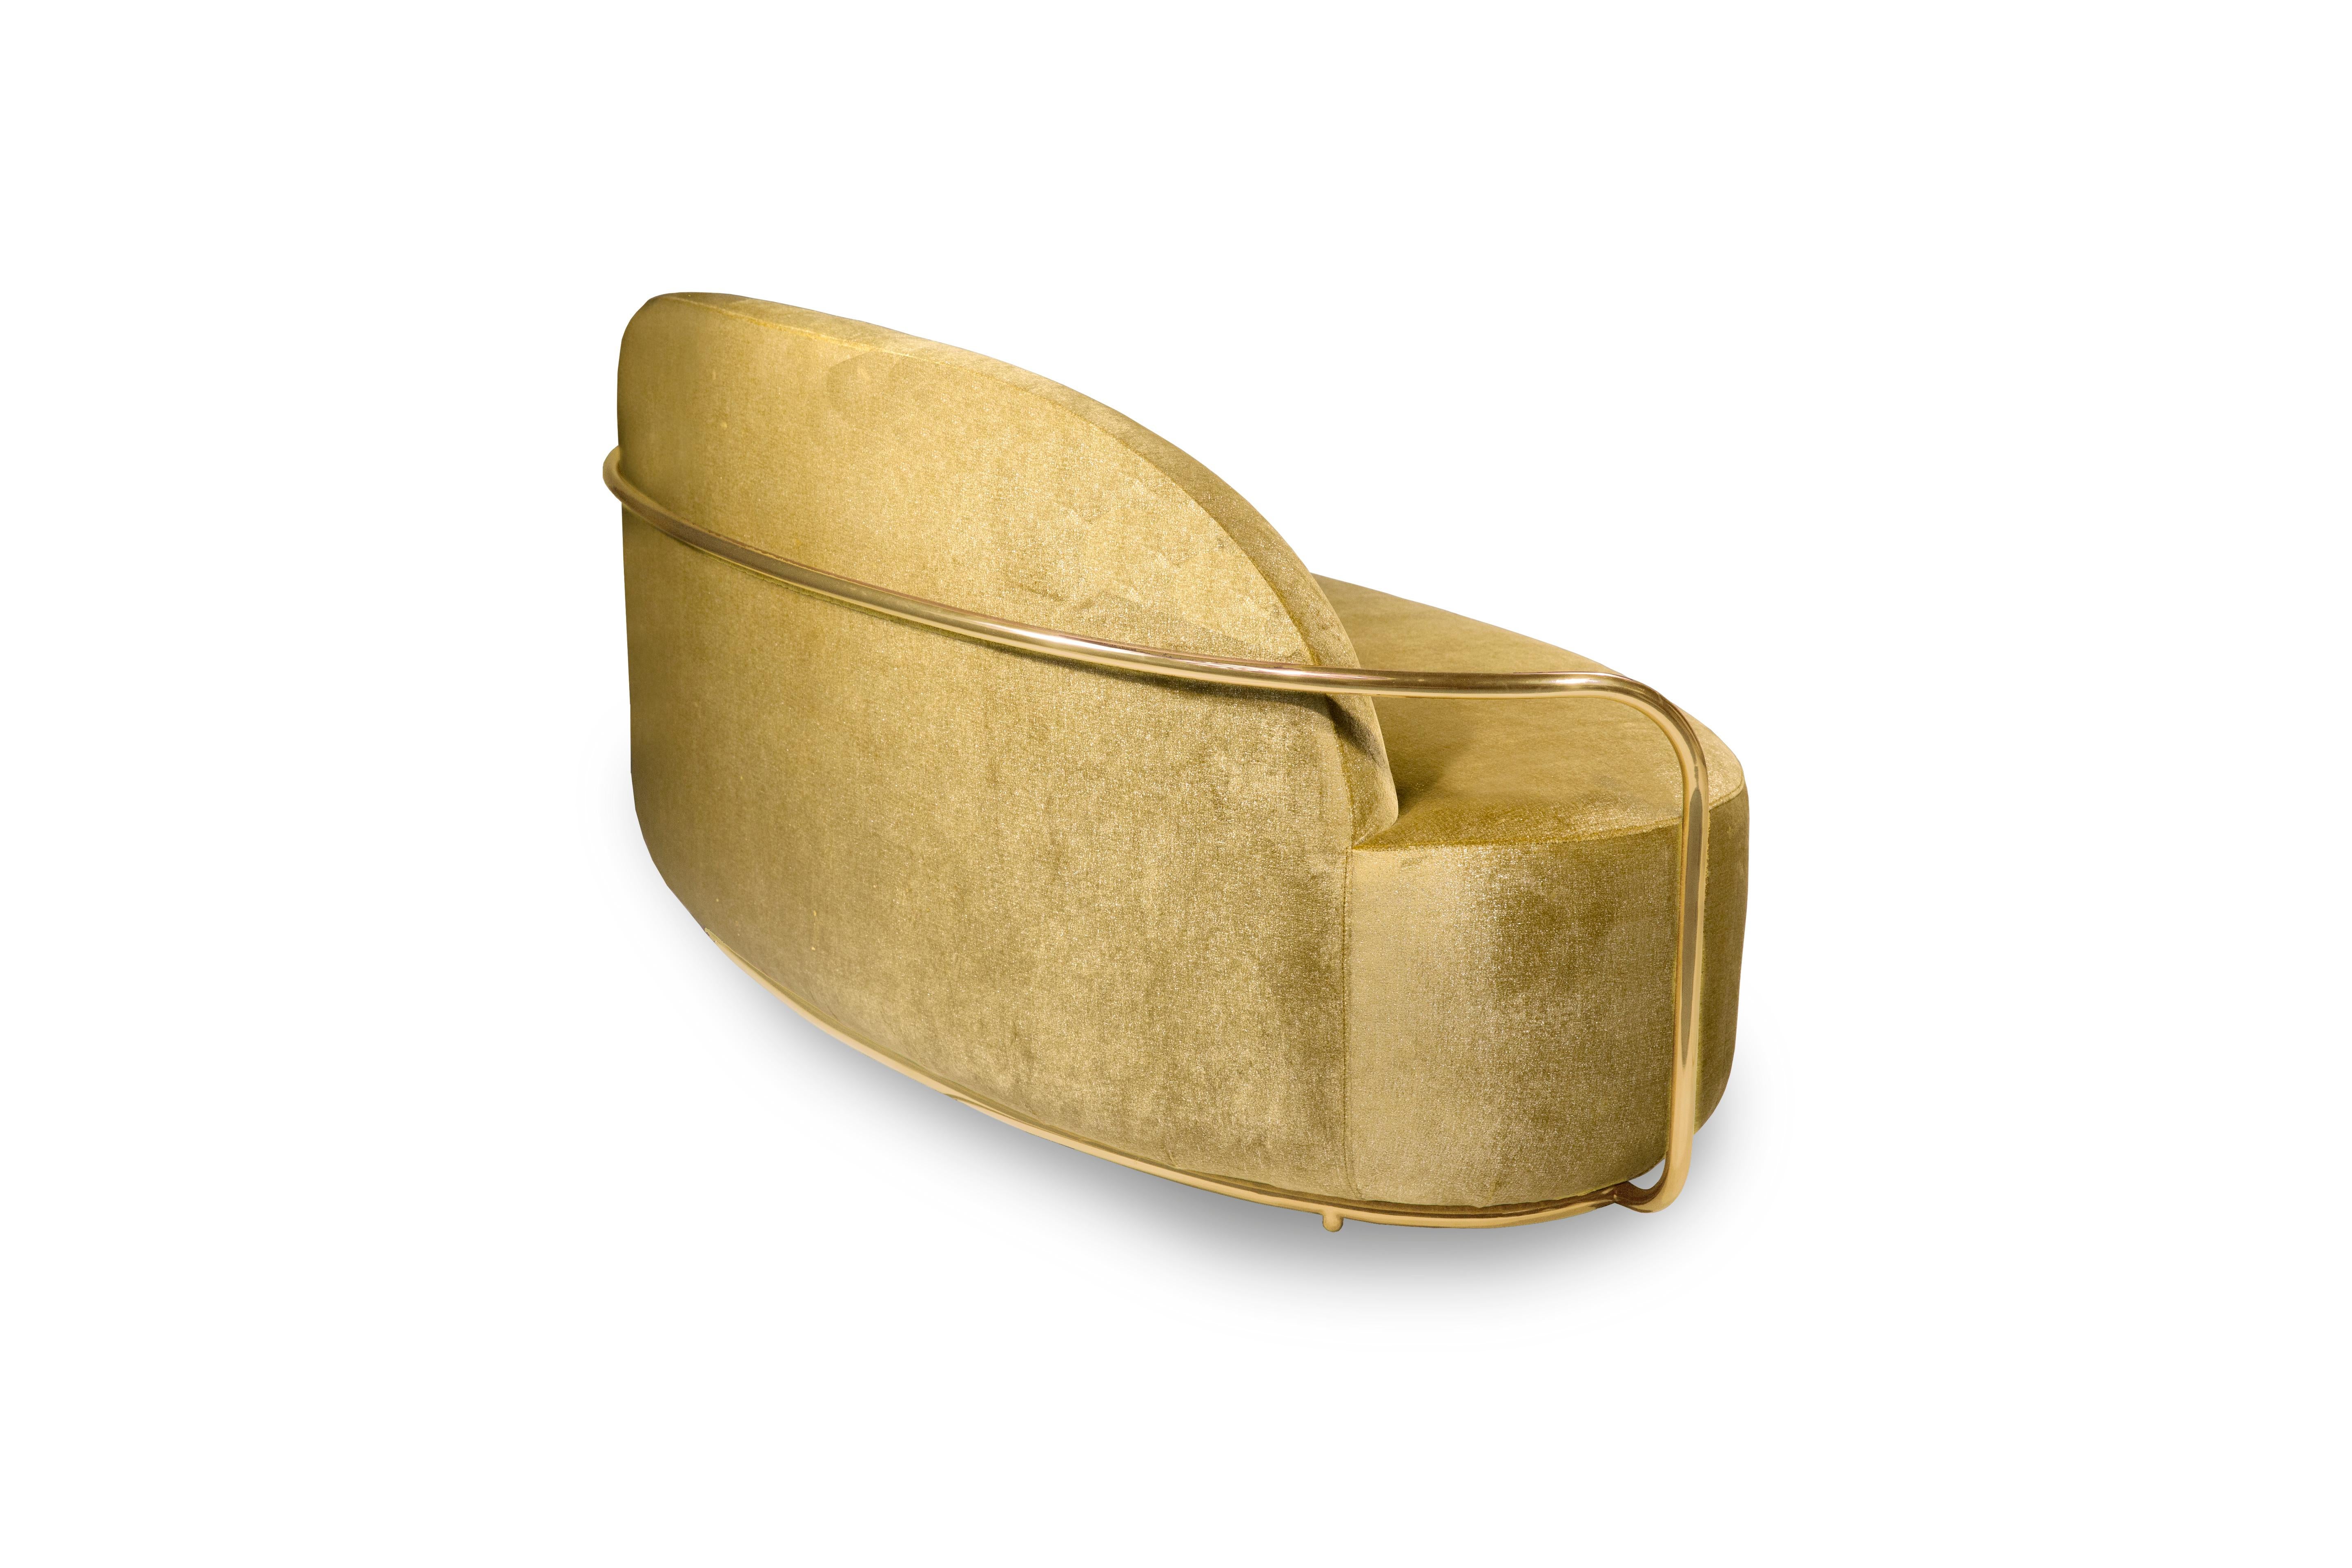 Modern Orion 3 Seat Sofa with Dedar Velvet and Gold Arms by Nika Zupanc For Sale